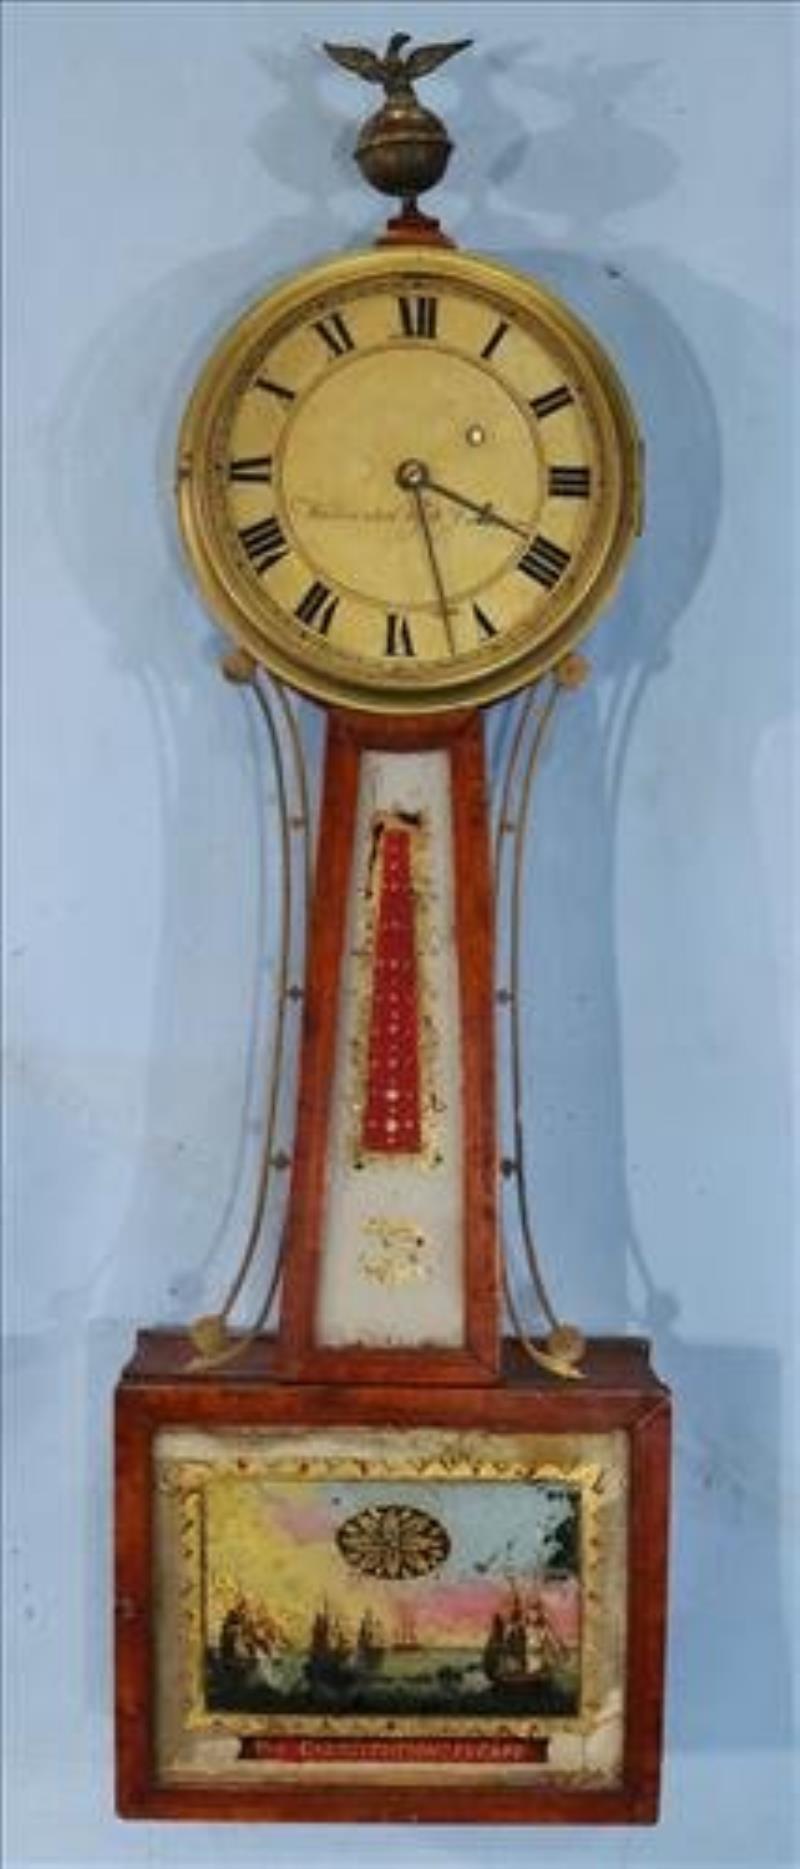 Early banjo clock with reverse painting and eagle crown